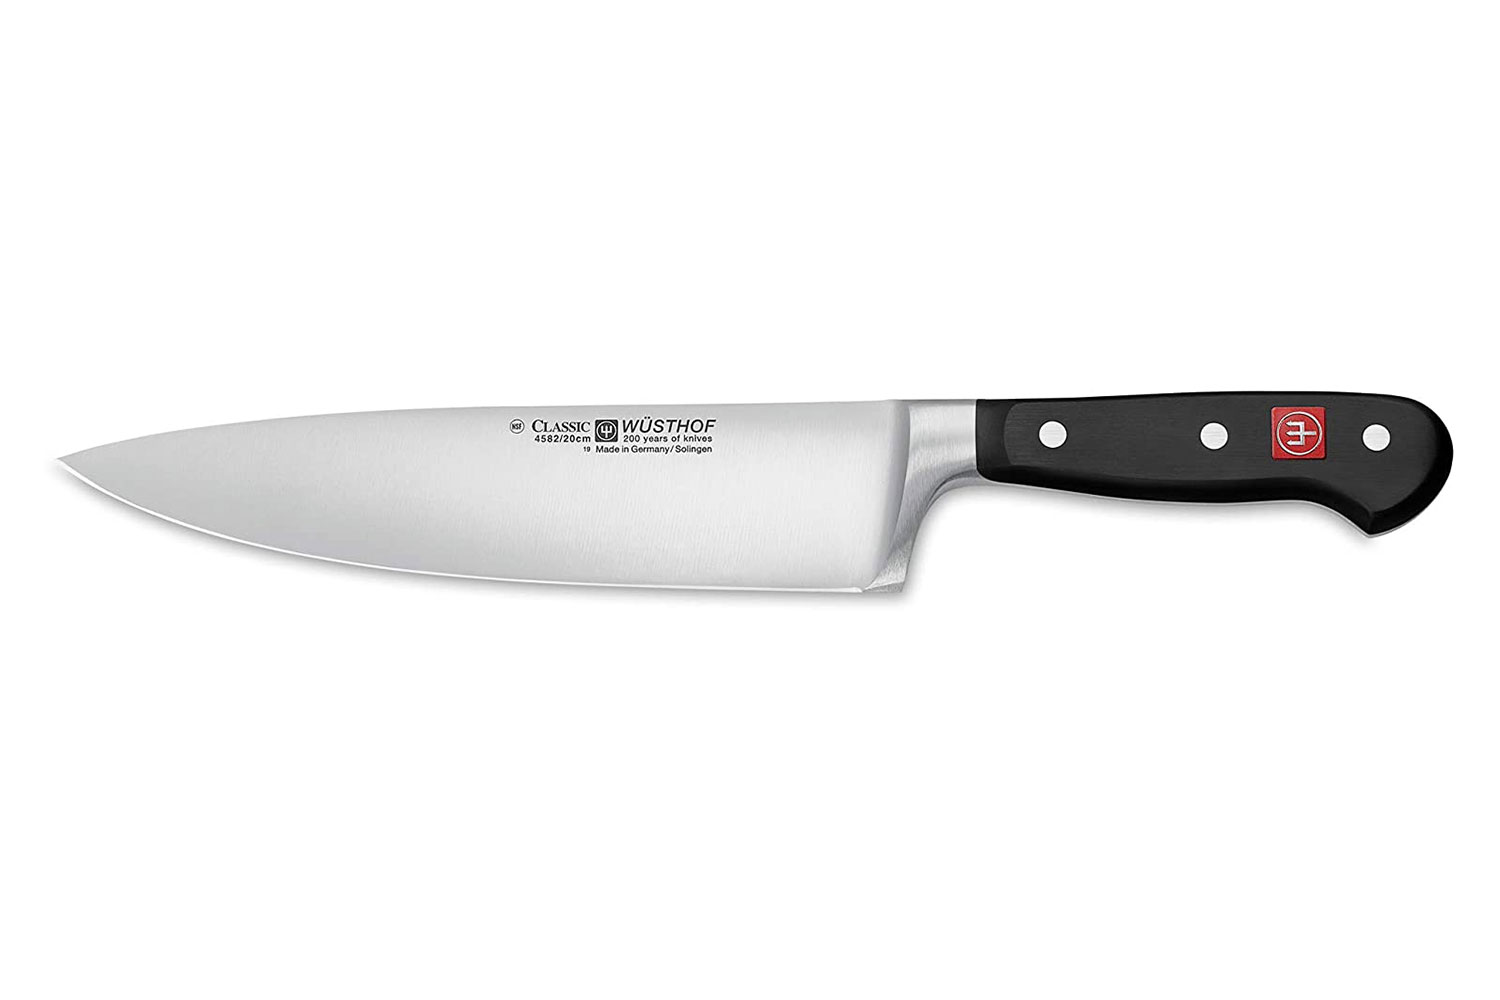 https://www.themanual.com/wp-content/uploads/sites/9/2020/11/wusthof-classic-8-inch-chefs-knife.jpg?fit=800%2C800&p=1